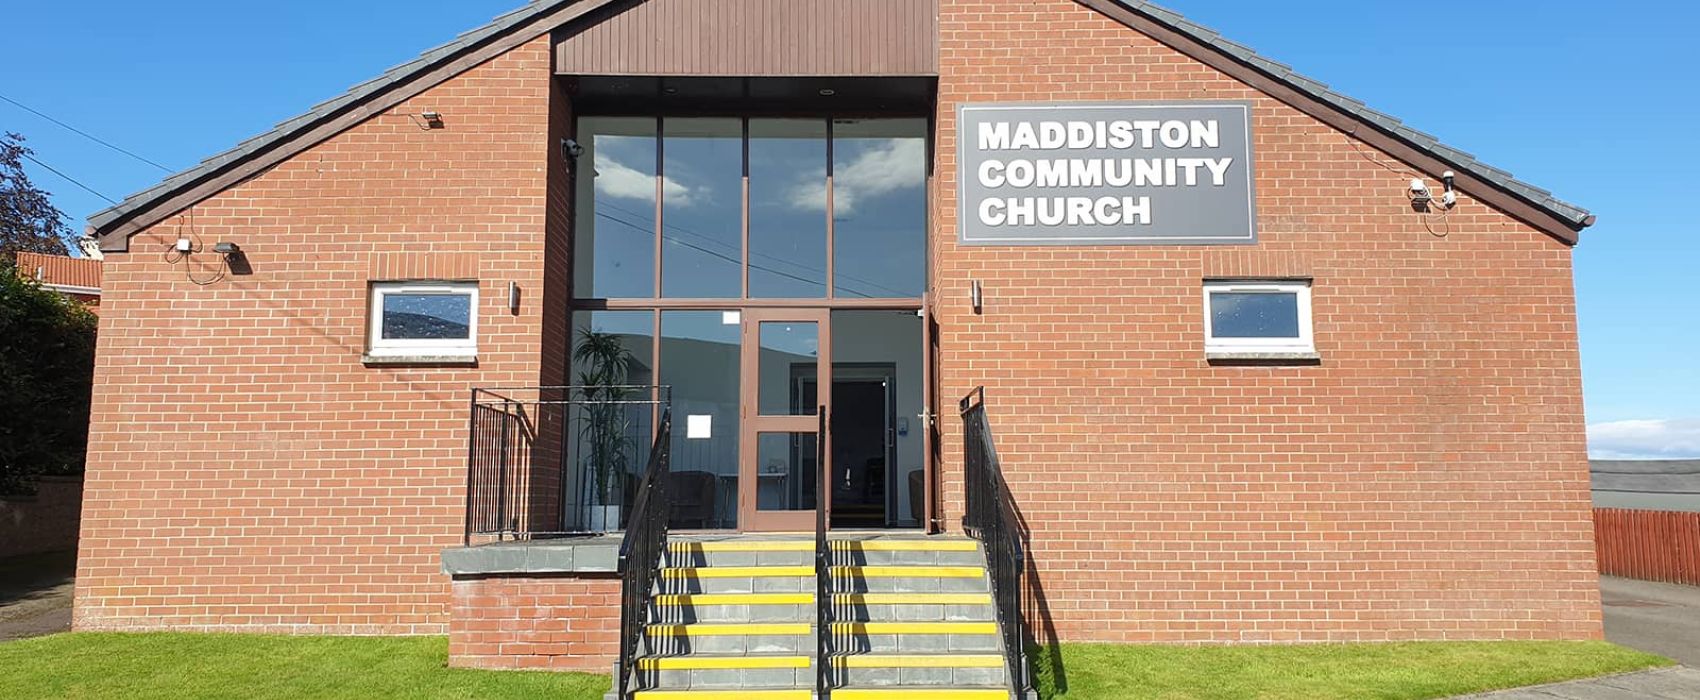 Maddiston Community Church front view on sunny day